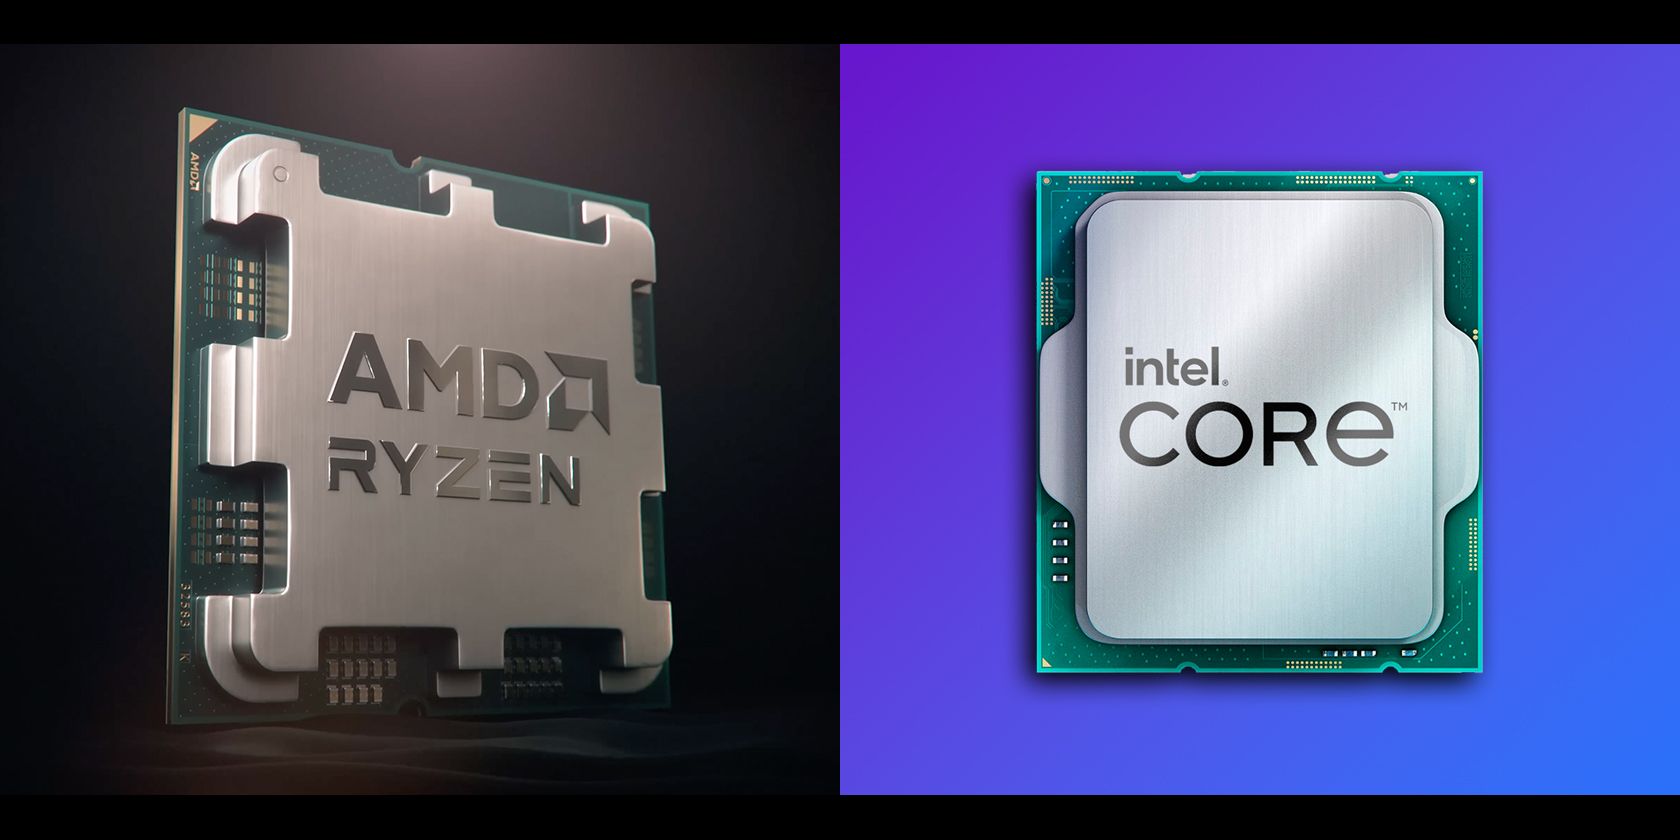 AMD vs. Intel: What Is the Best Gaming CPU?